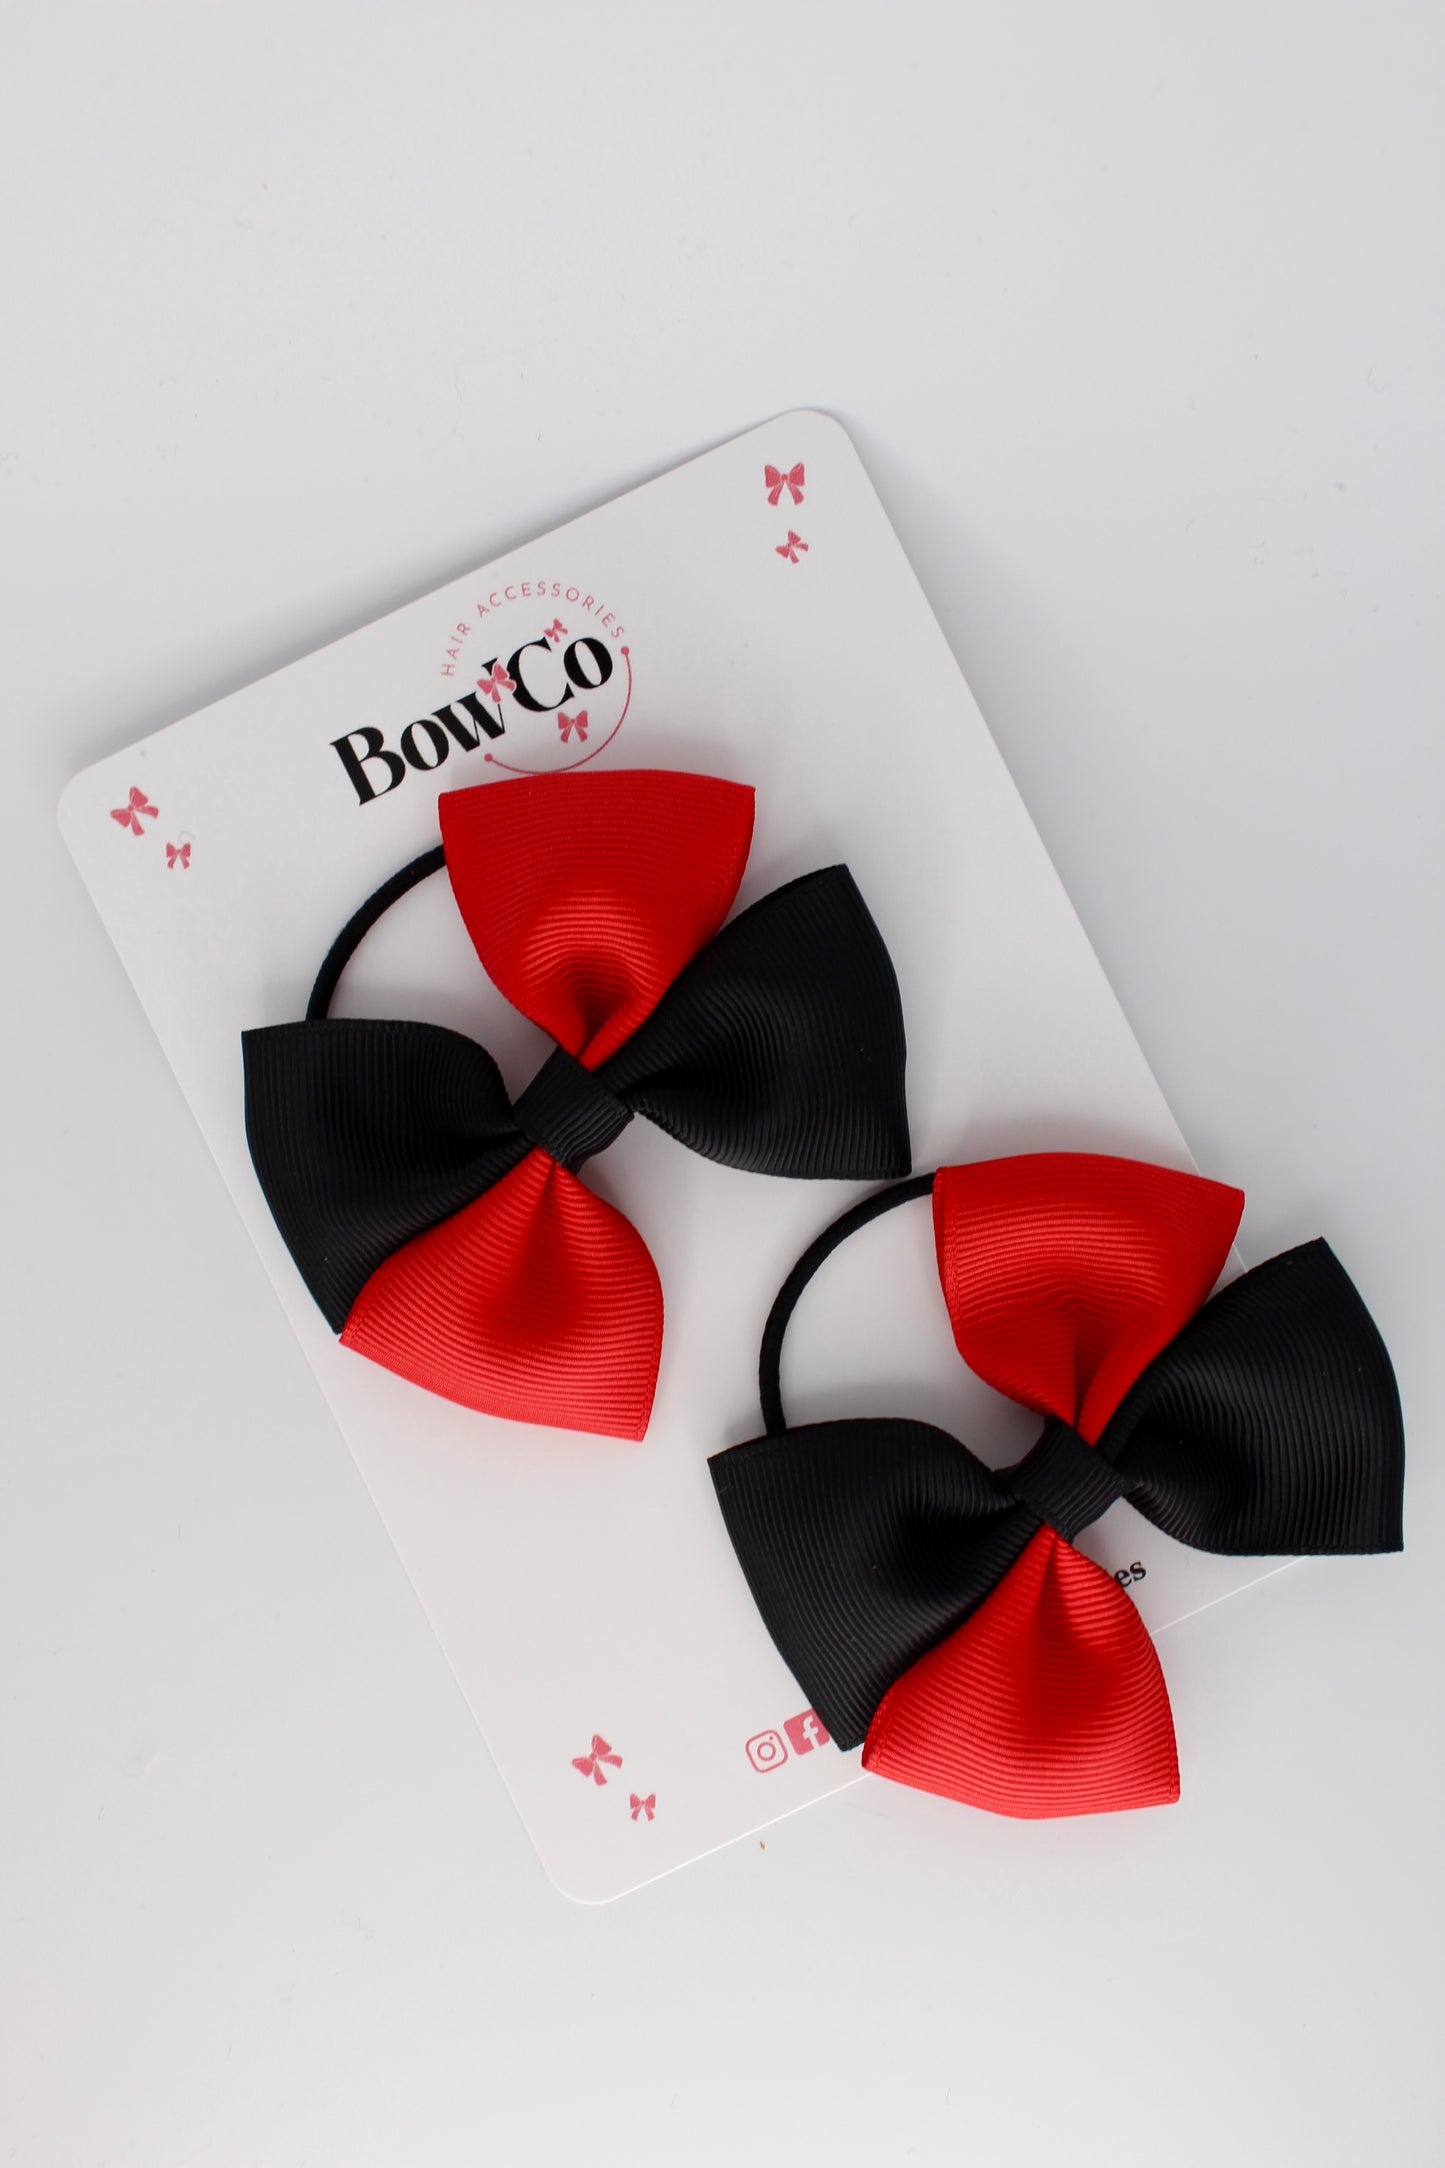 3 Inch Twist Bow - 2 Pack - Elastic Band - Red and Black